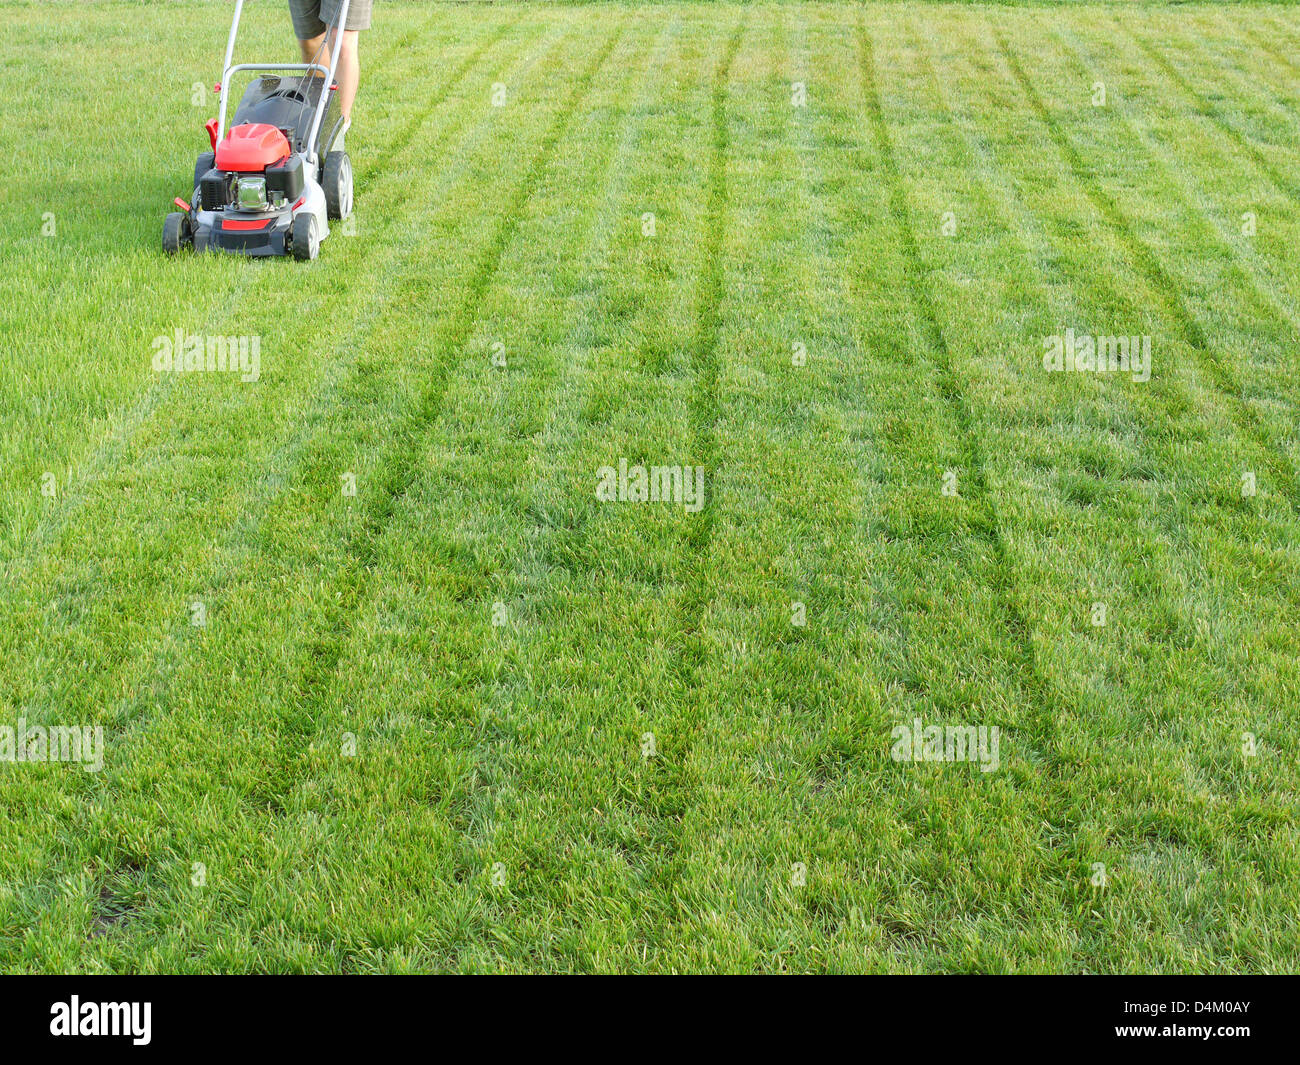 Man mowing grass with grass-mower Stock Photo